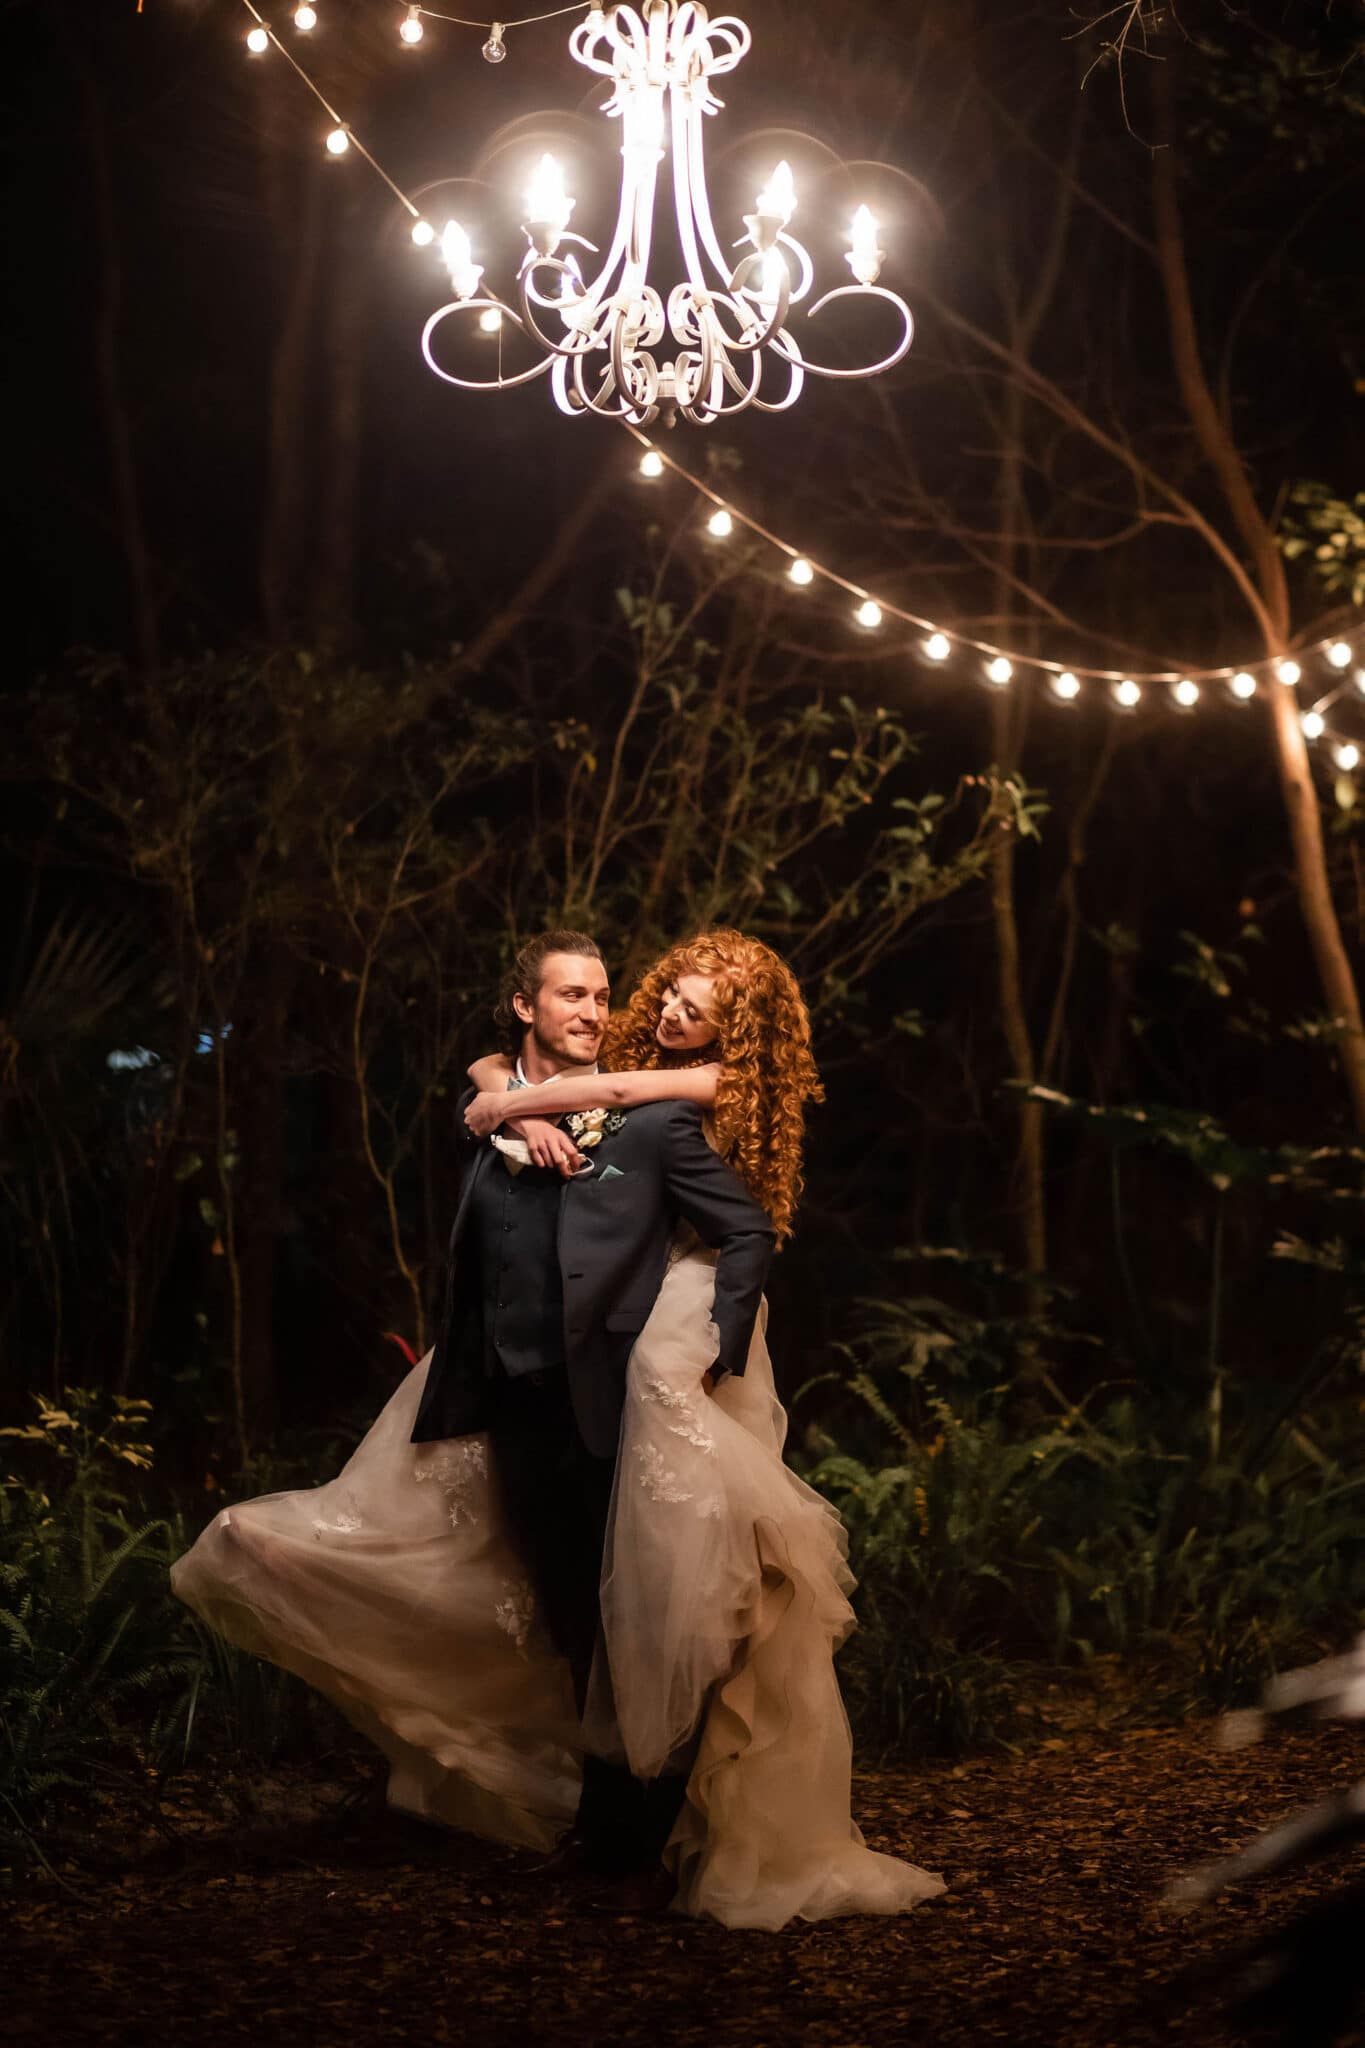 groom carries bride on his back as she looks at him outside at the night under chandelier hanging from trees